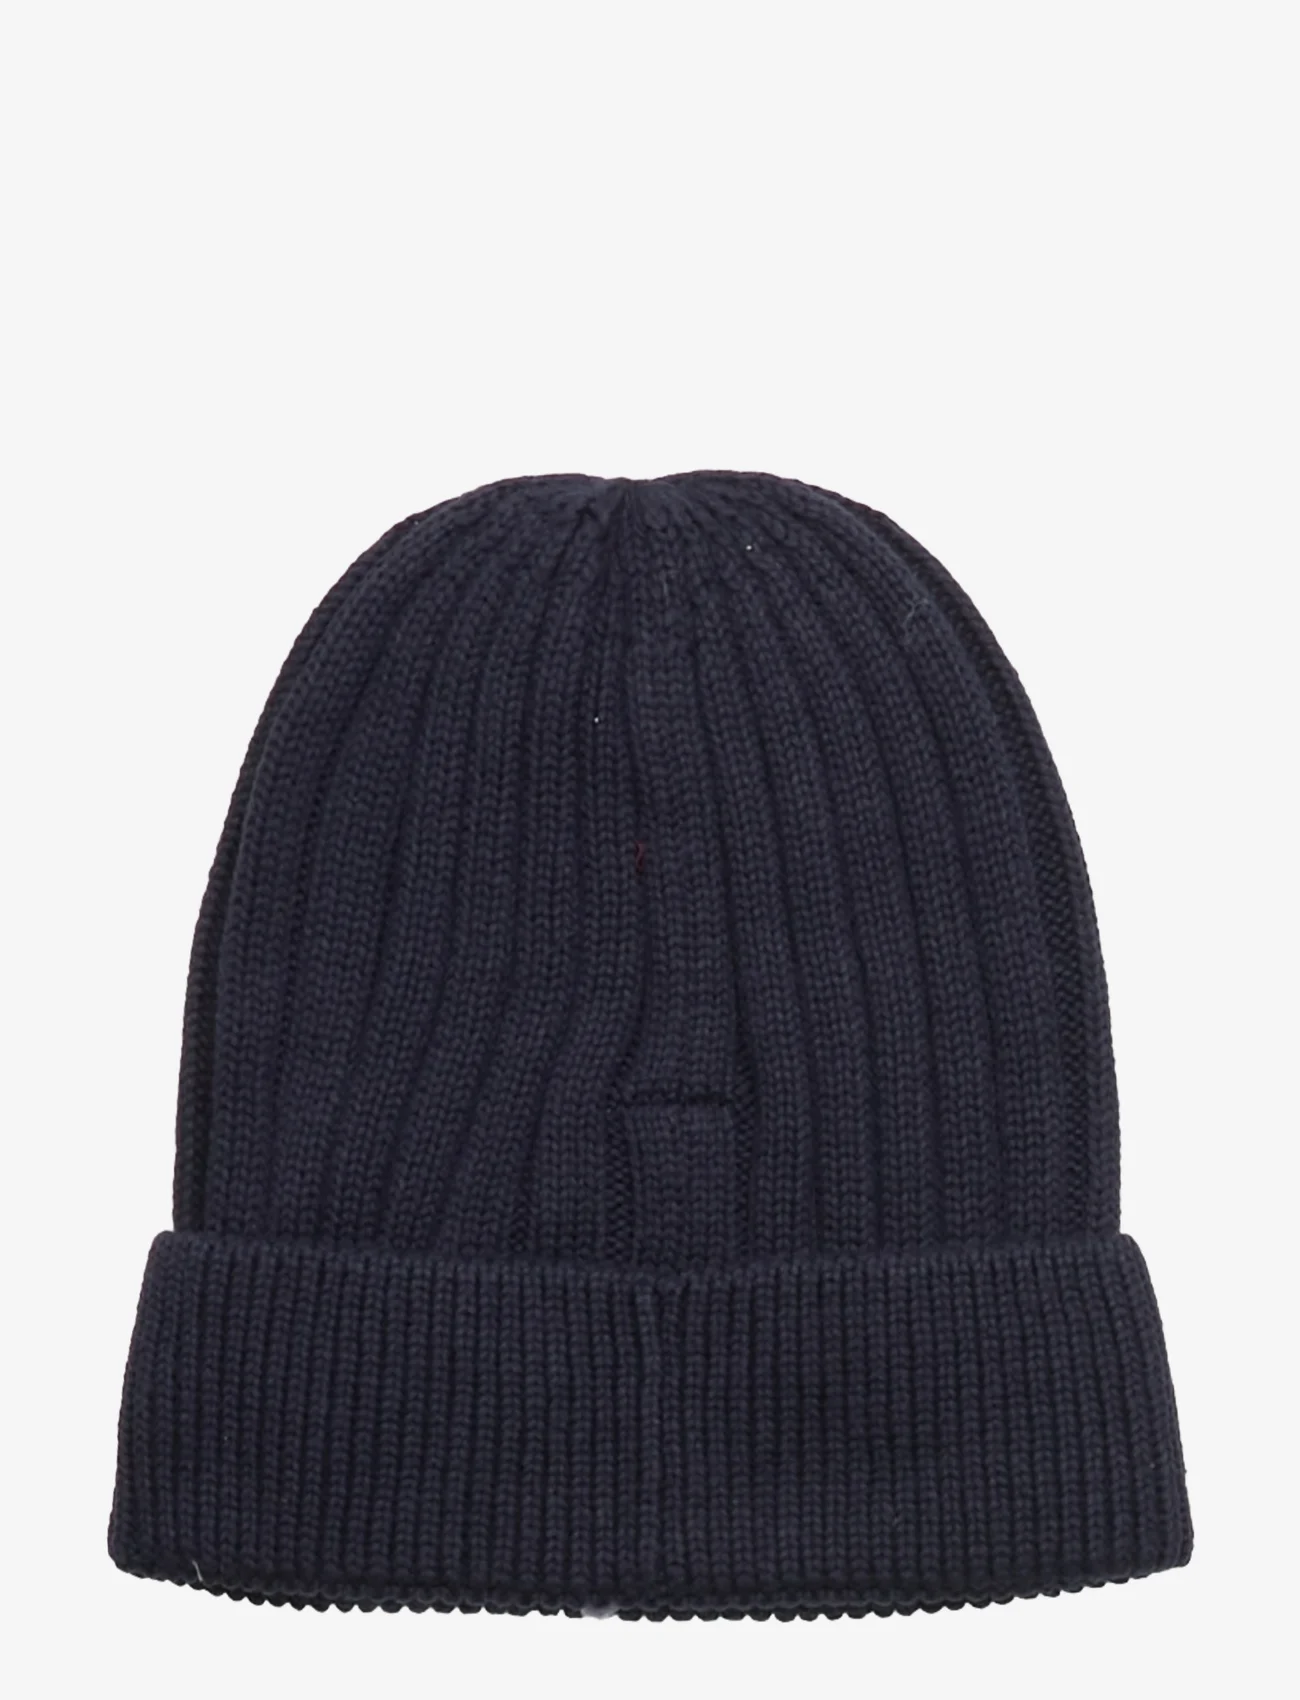 Timberland - PULL ON HAT - beanies - navy - 1